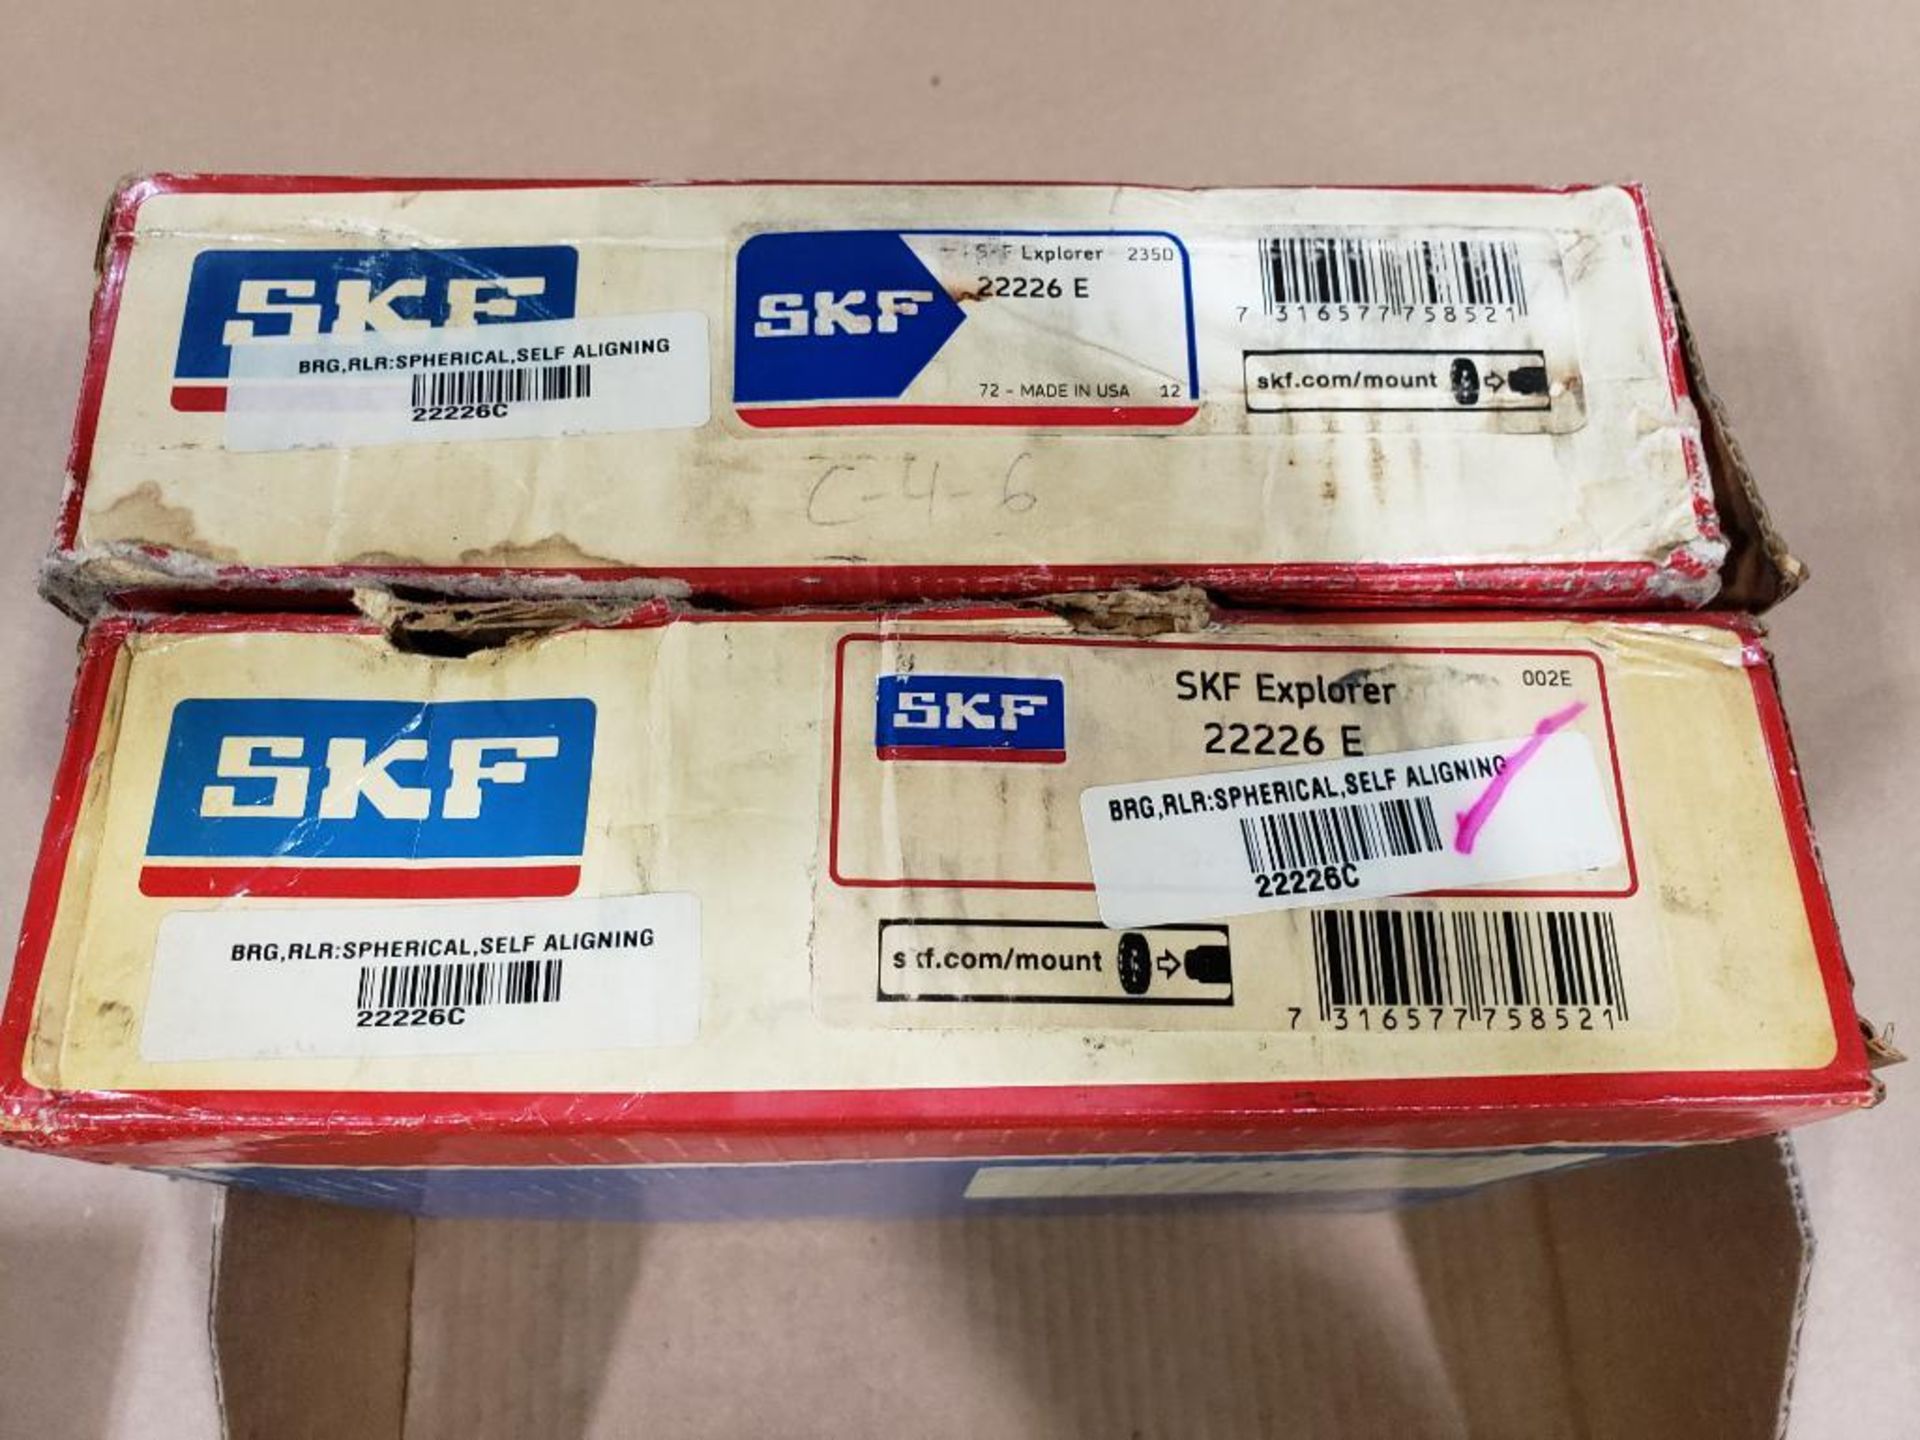 Qty 2 - SKF bearings. Part number 22226E. - Image 2 of 4